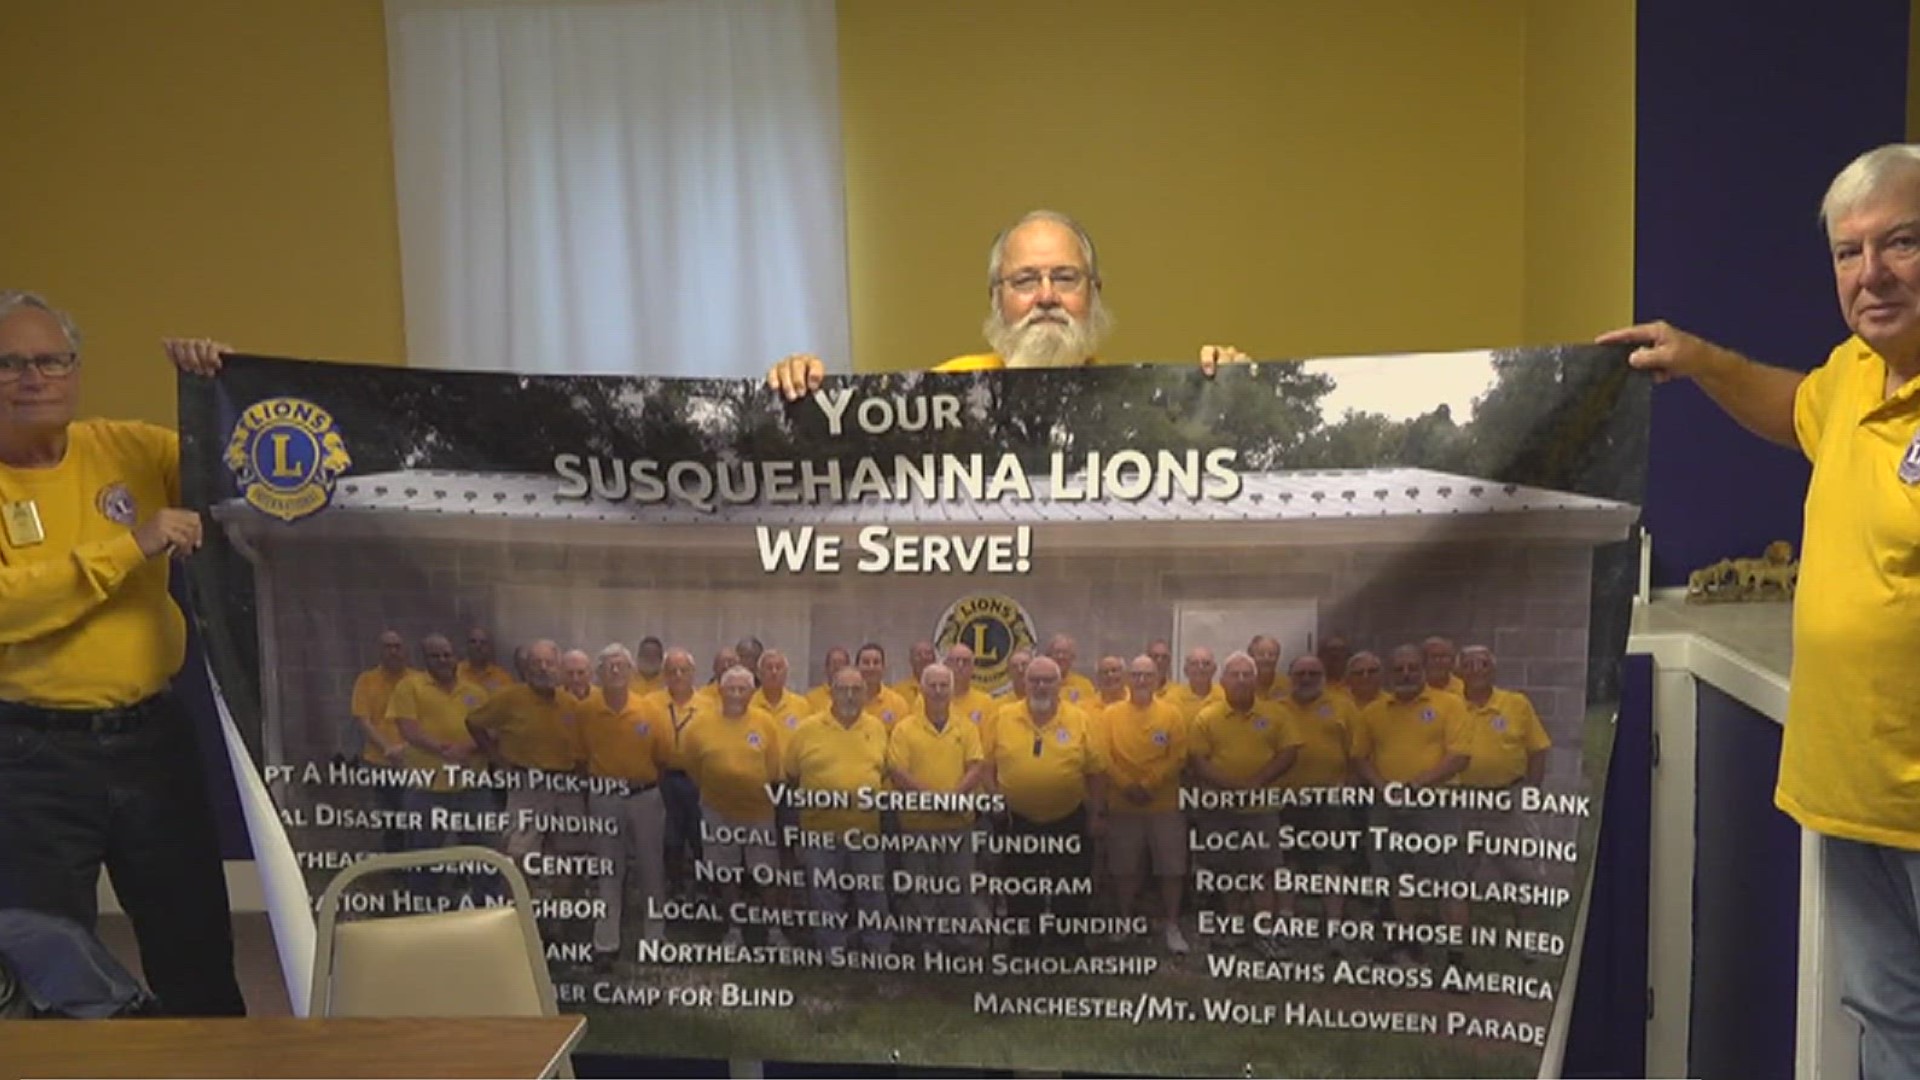 The Susquehanna Lions Club of Mt. Wolf and Manchester is celebrating 90 years of giving back to the community.